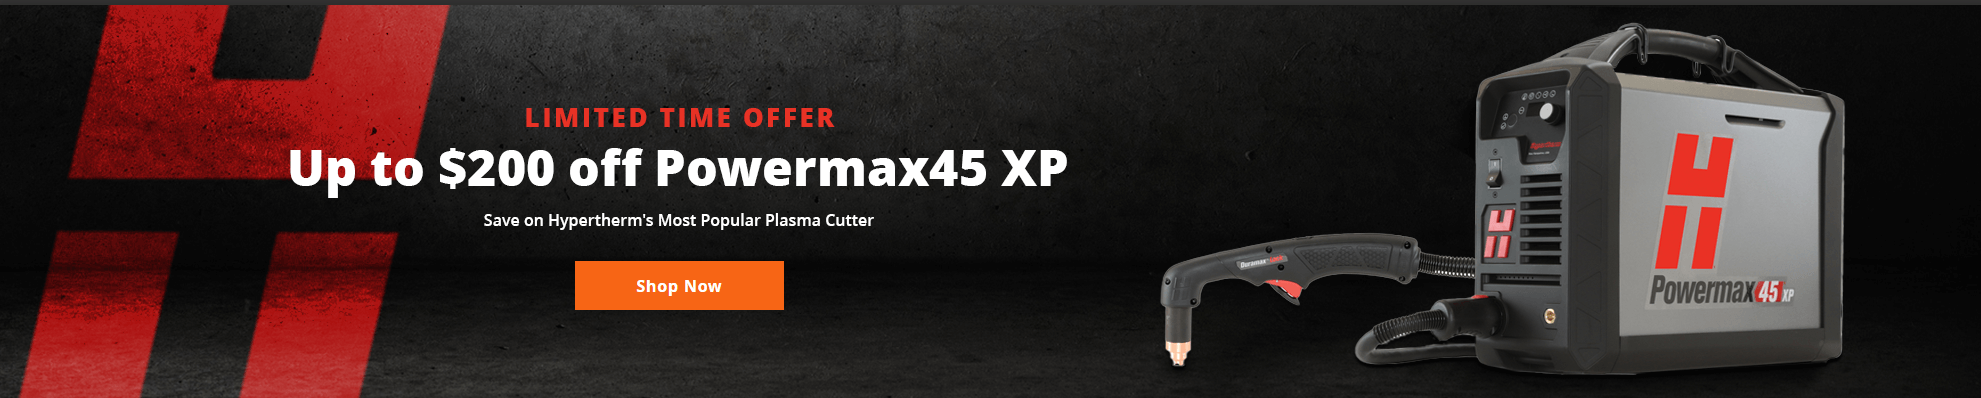 Hypertherm Powermax45 XP plasma cutters on sale - up to $200 off